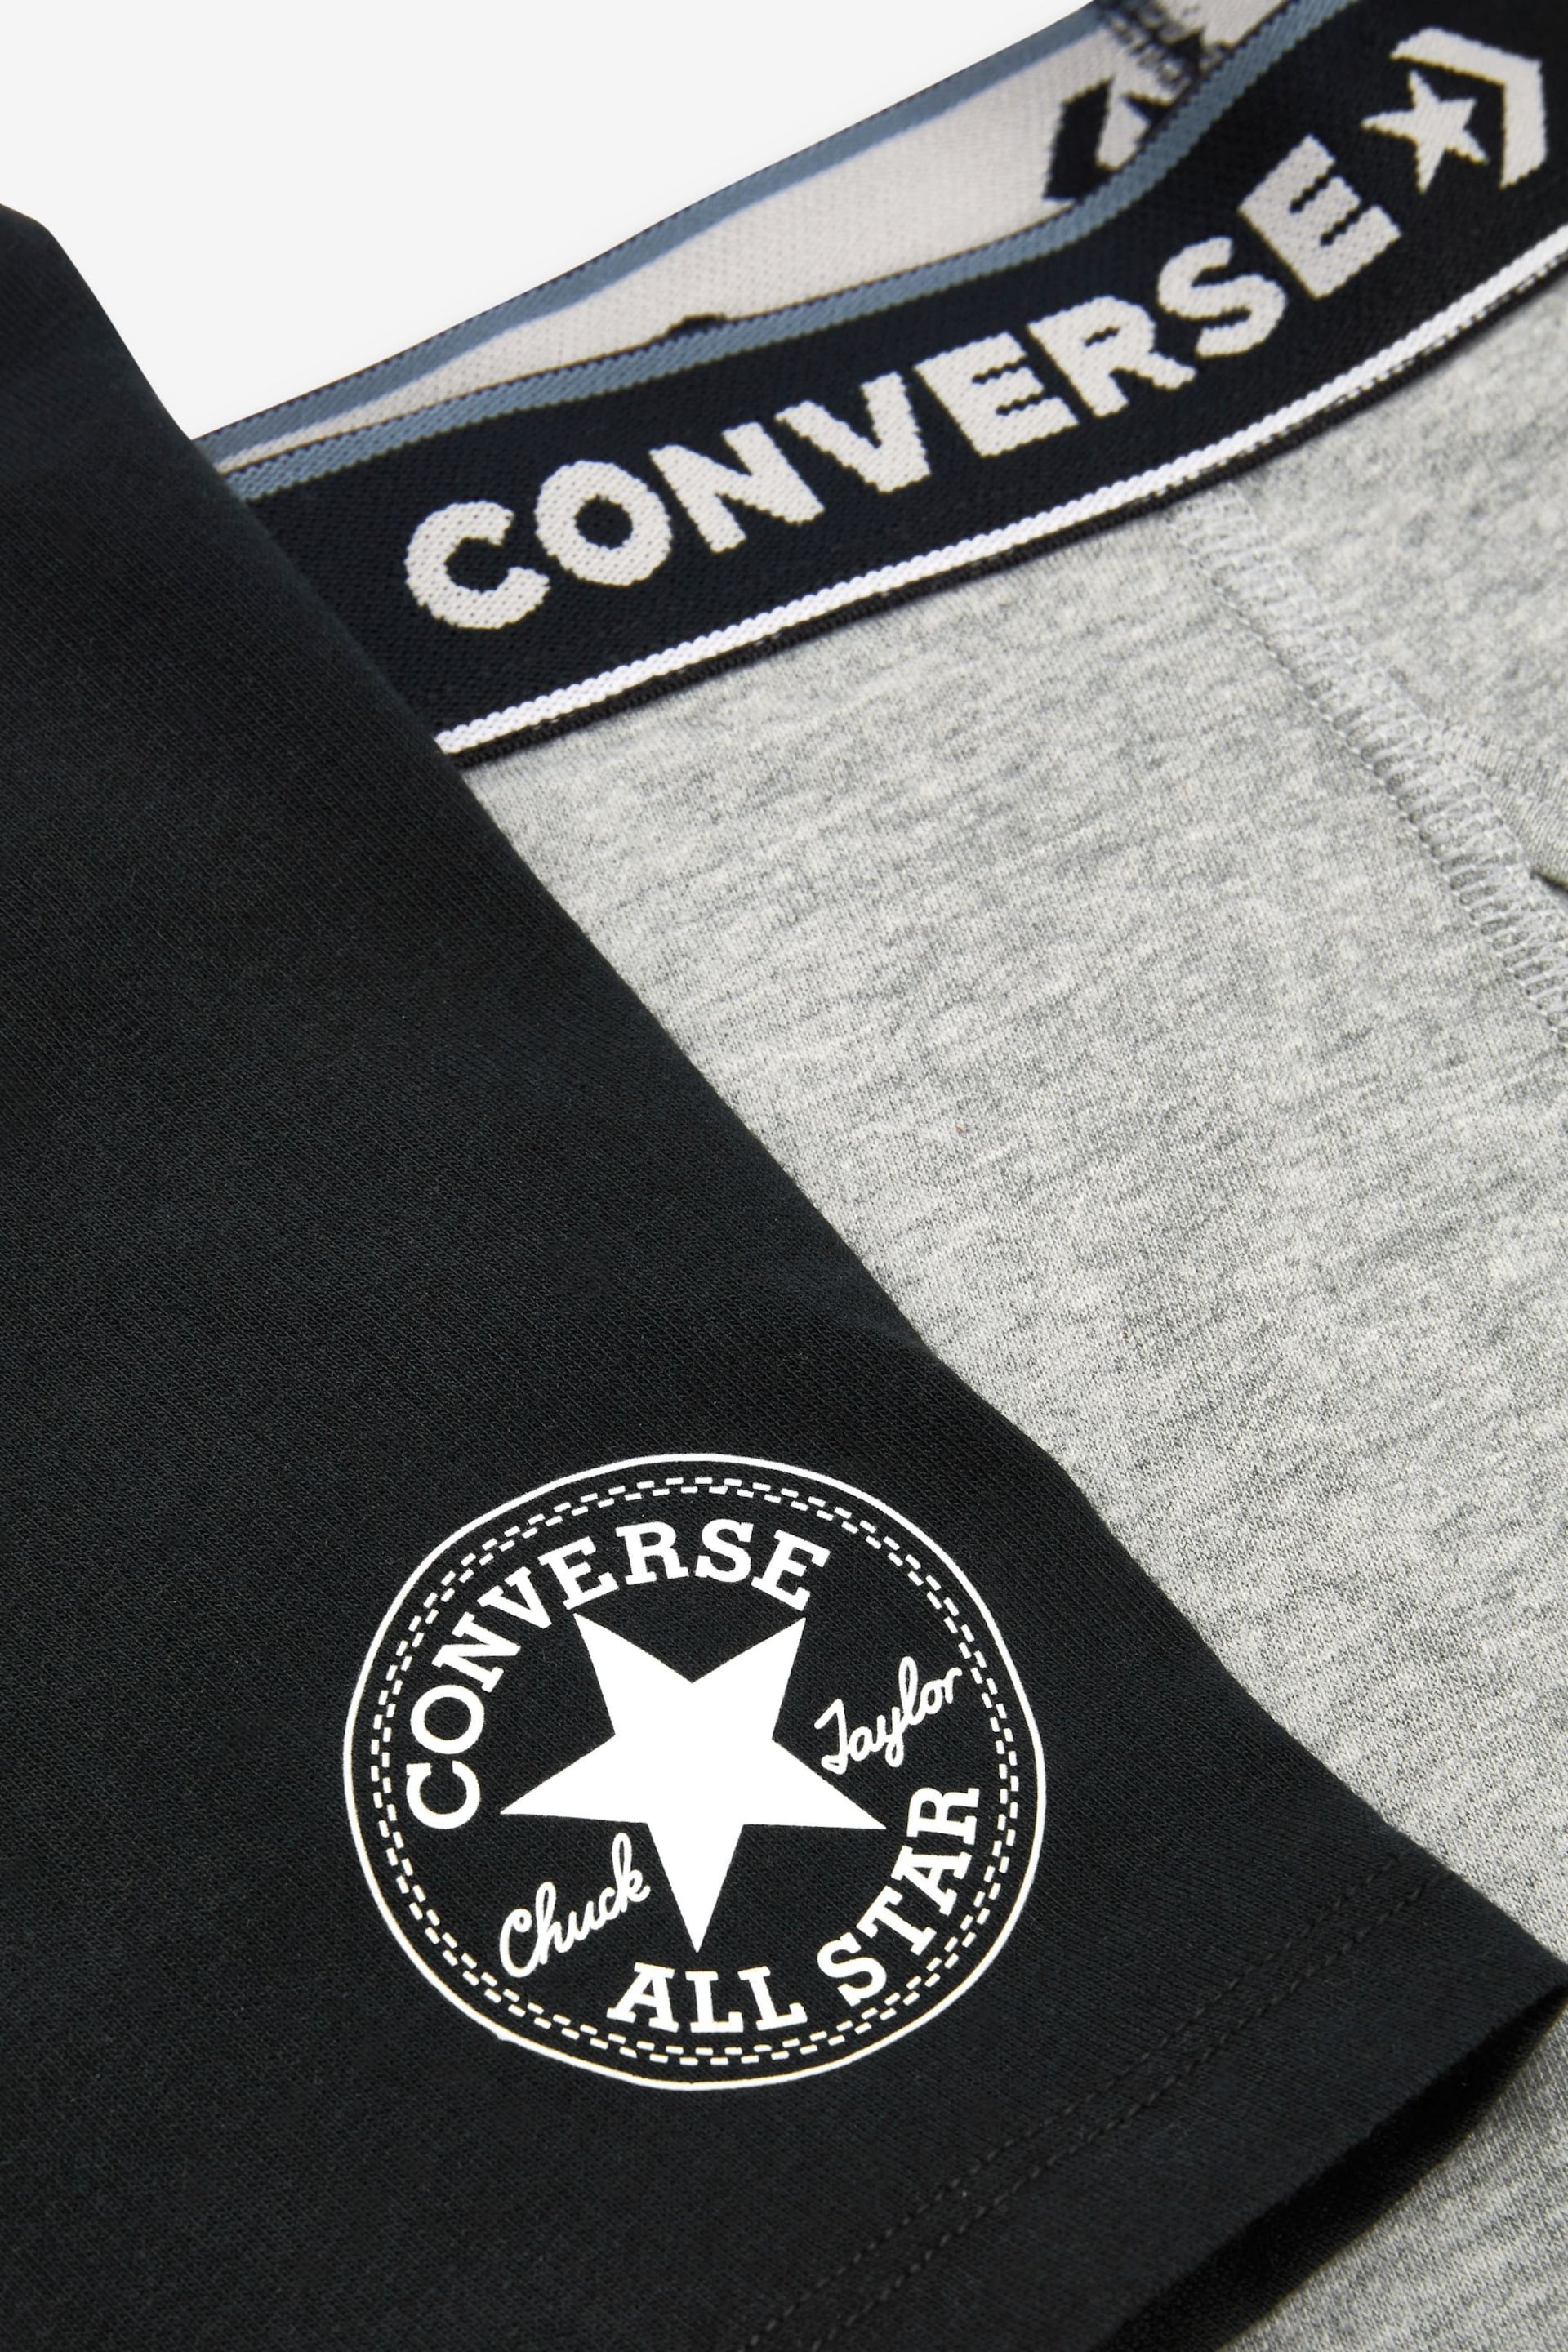 Converse Black Boxers 2 Pack - Image 6 of 7